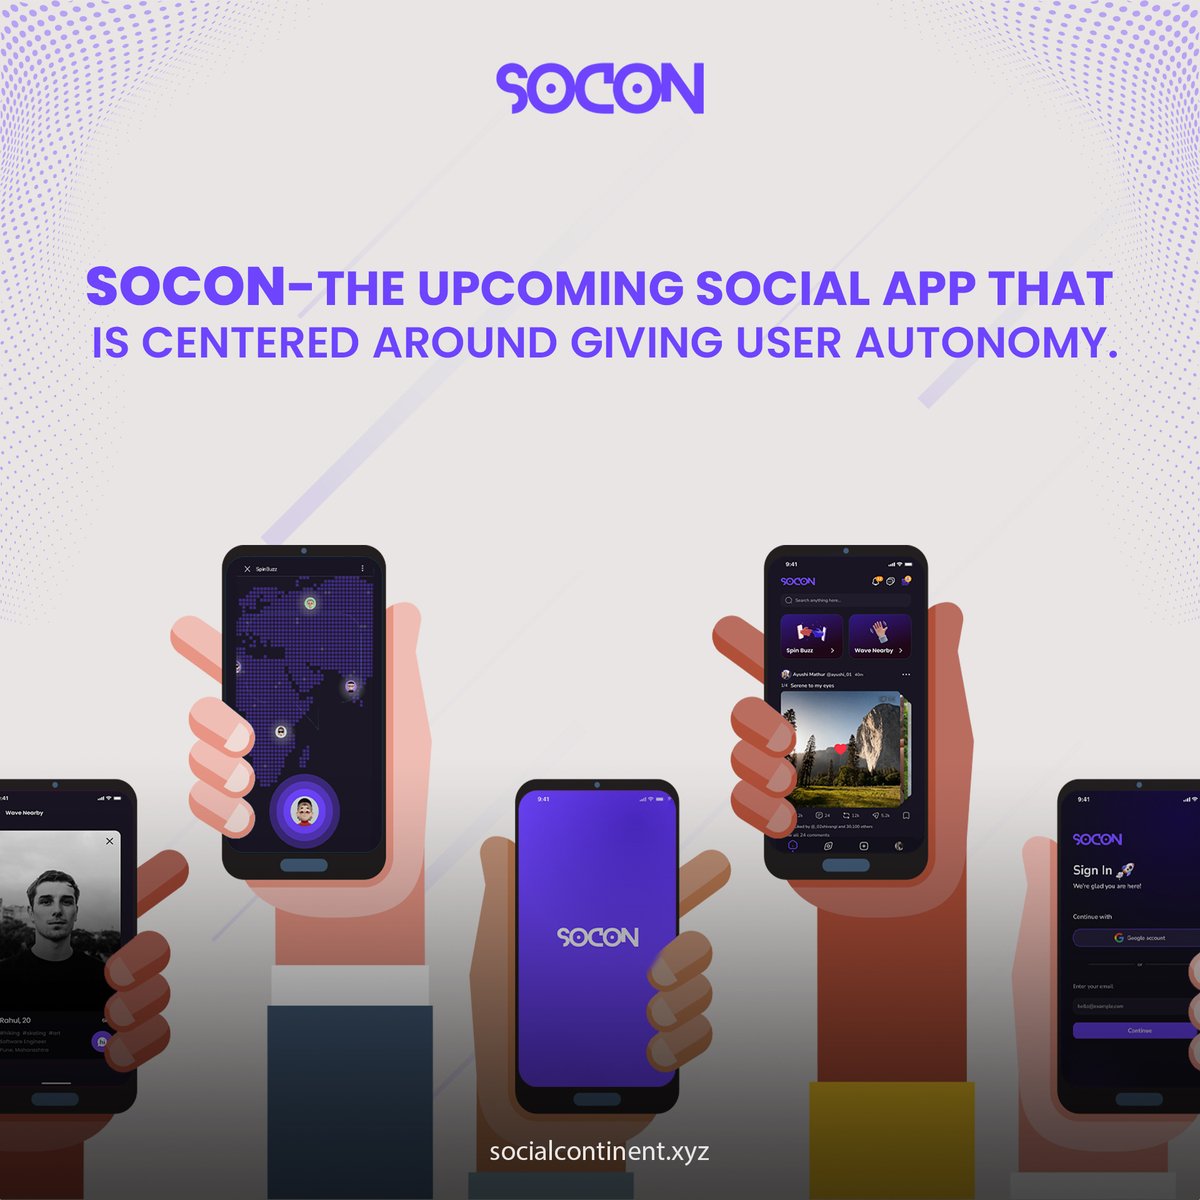 Embrace Your Digital Independence with SOCON! 🚀 Discover the upcoming social app designed to prioritize user autonomy above all else. SOCON places users at the forefront giving them complete ownership and autonomy of their online experience. 🌐

#SOCON #decentralized